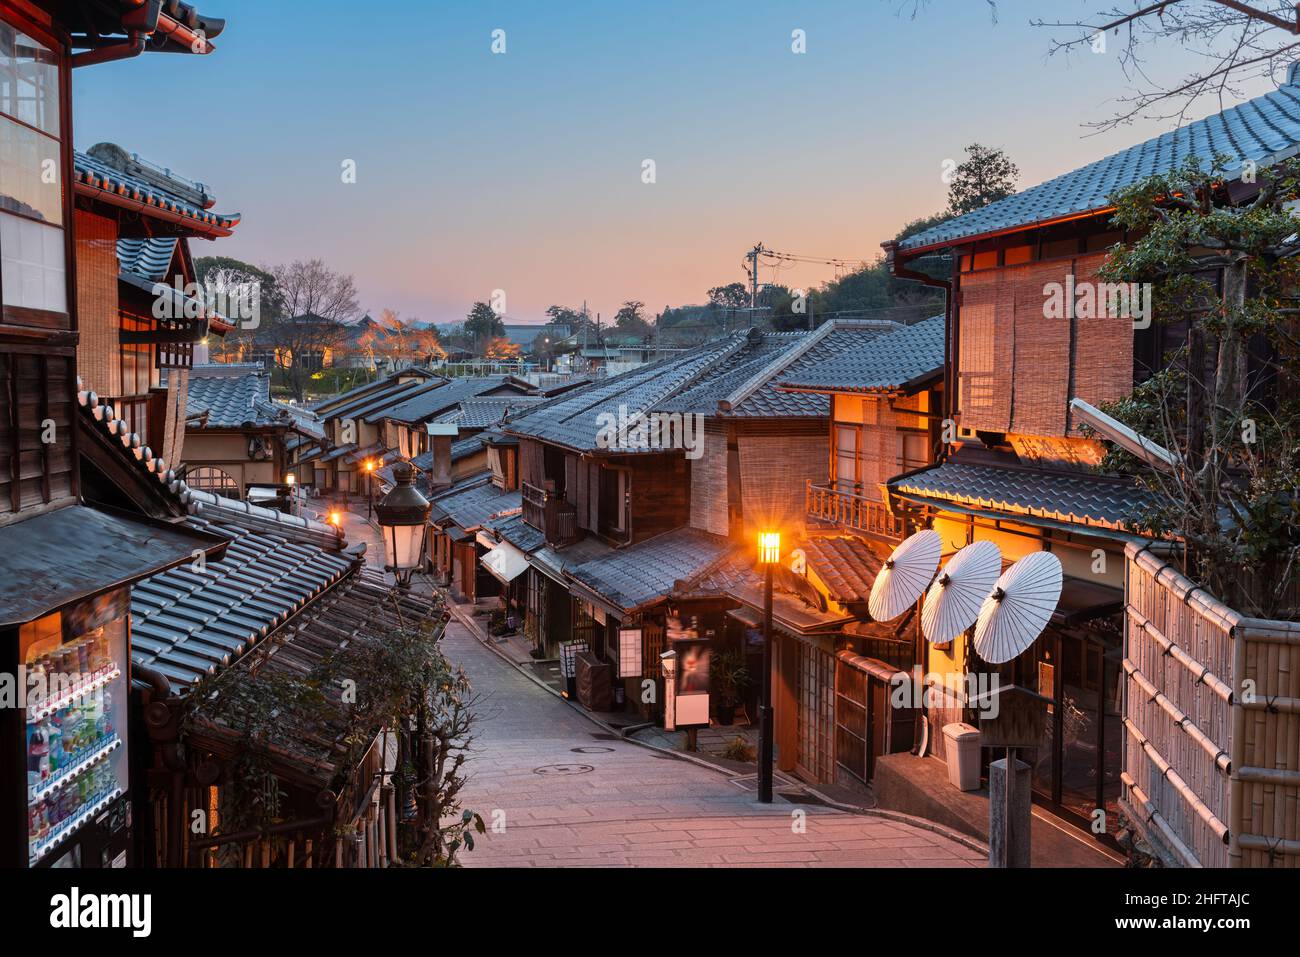 Kyoto, Japan old town streets at twilight in Highashiyama district. Stock Photo